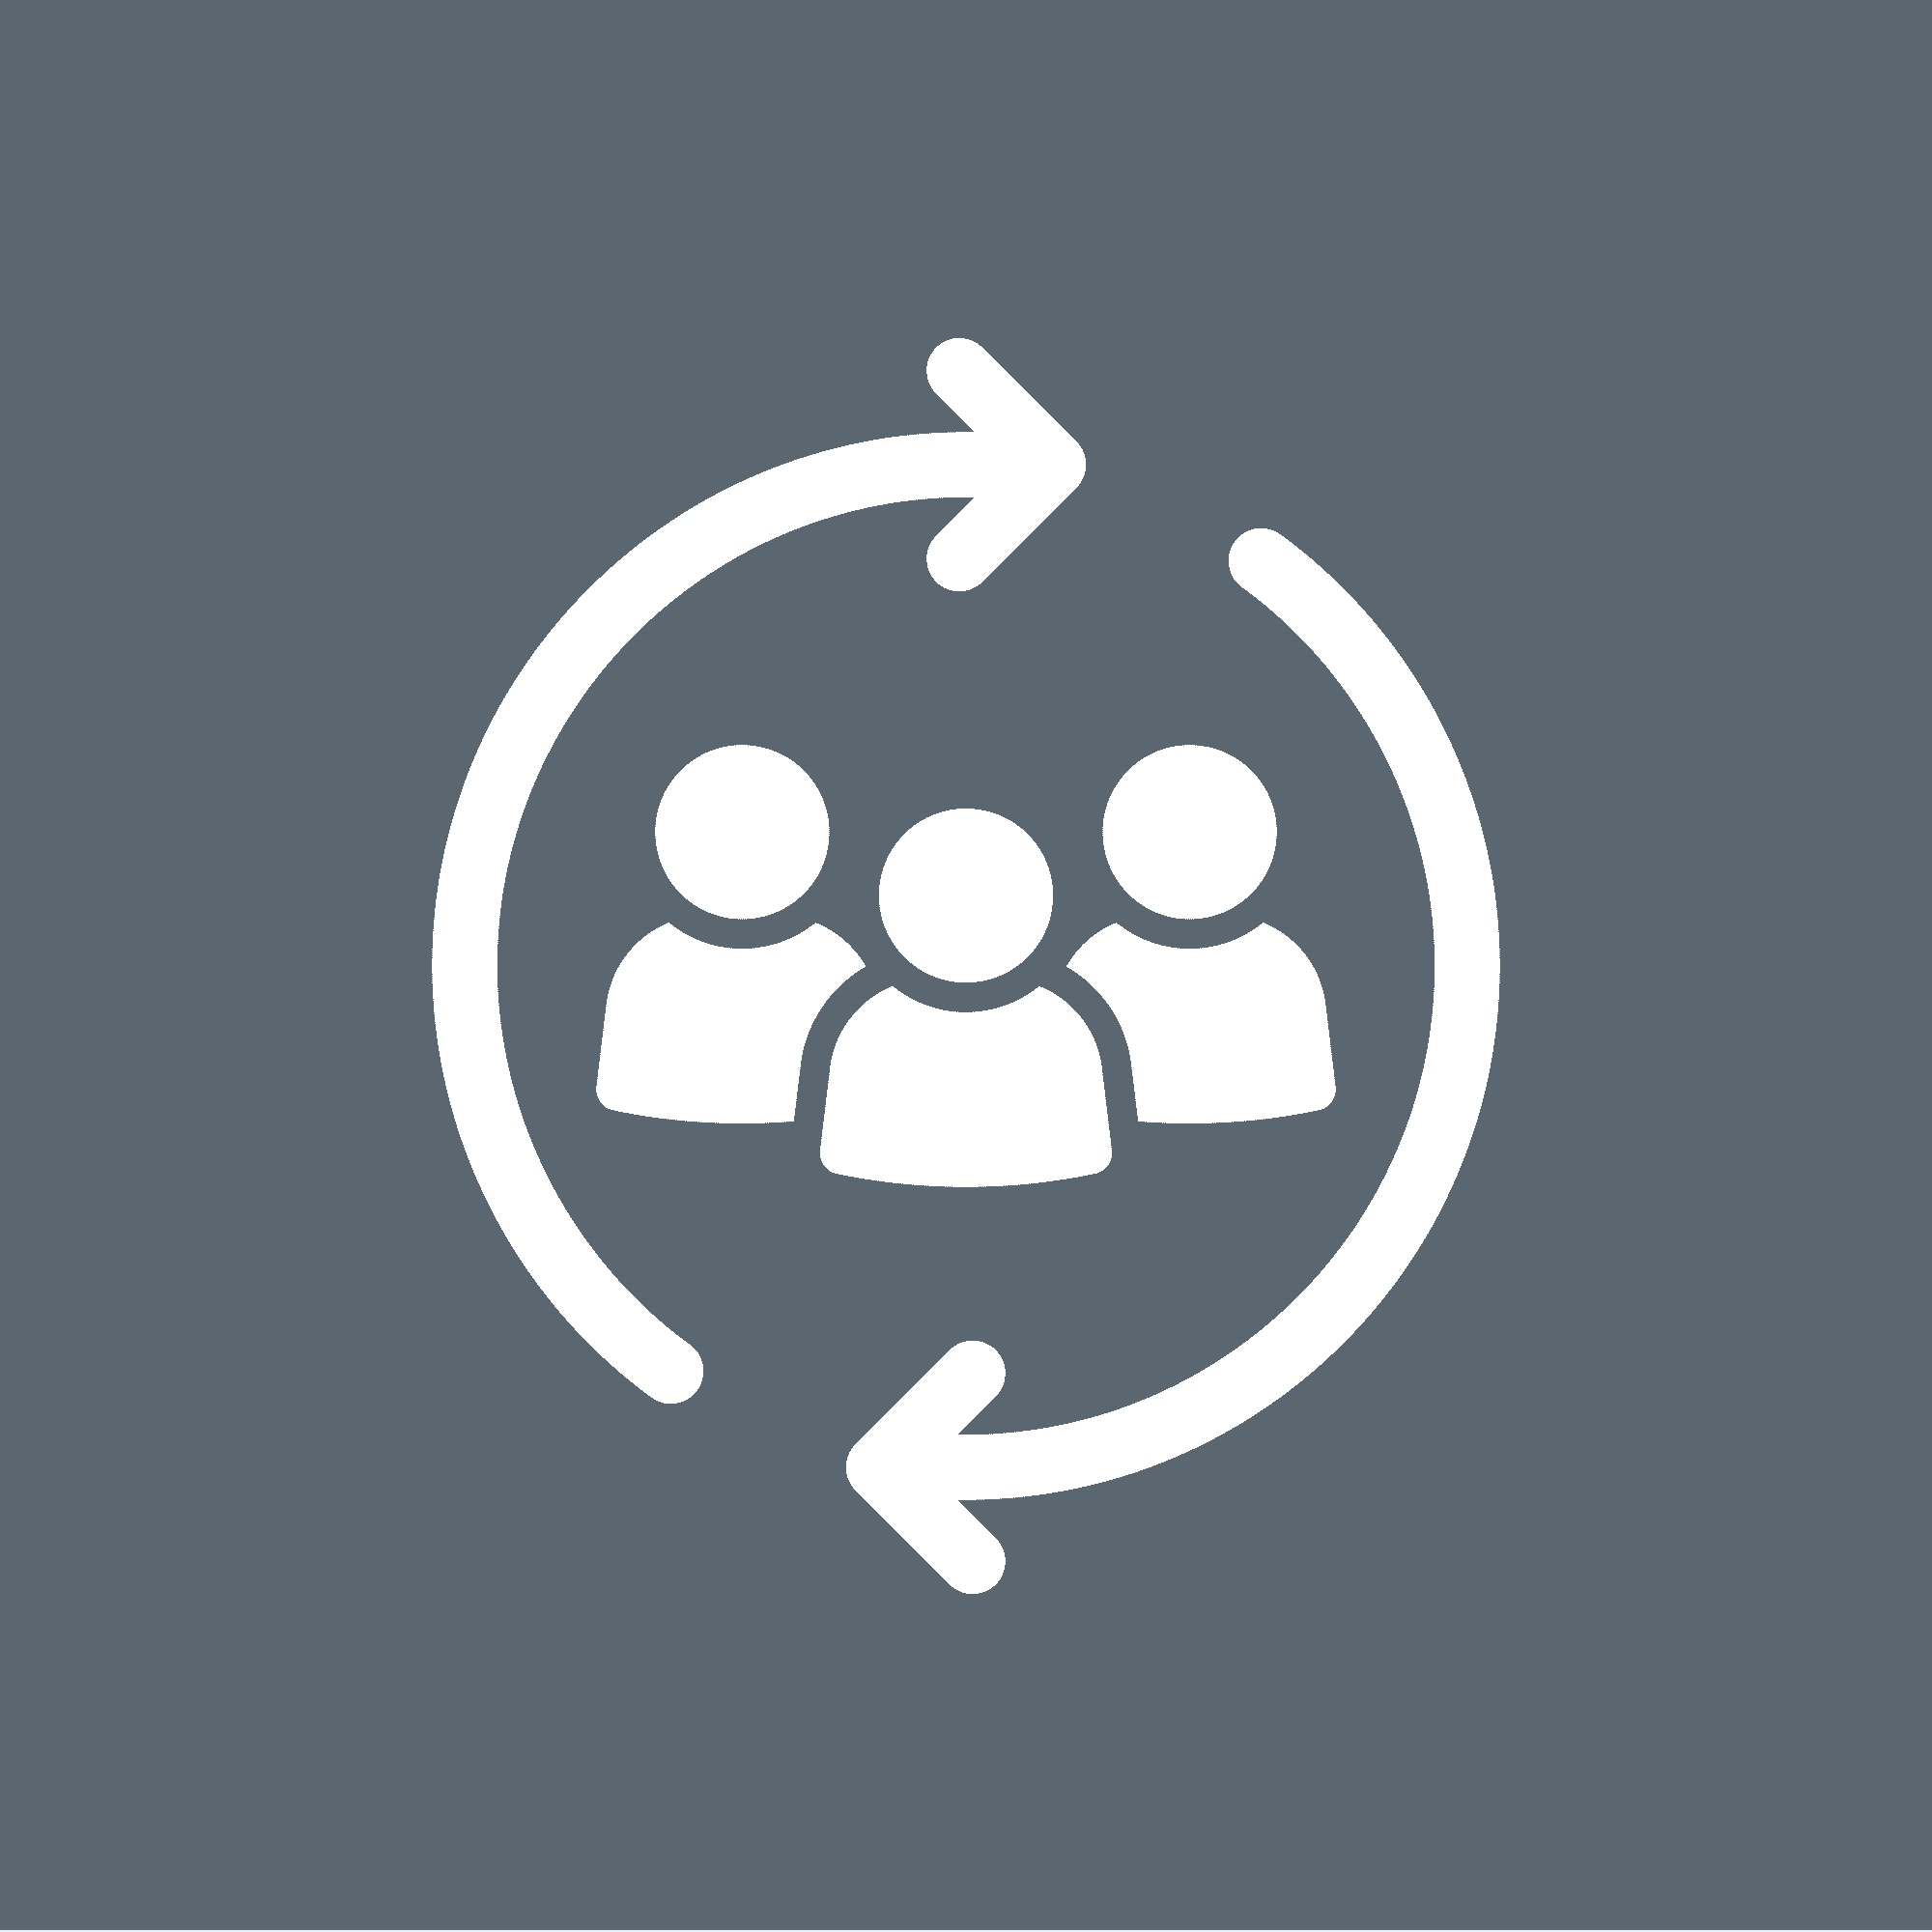 A group of people in a circle with arrows.